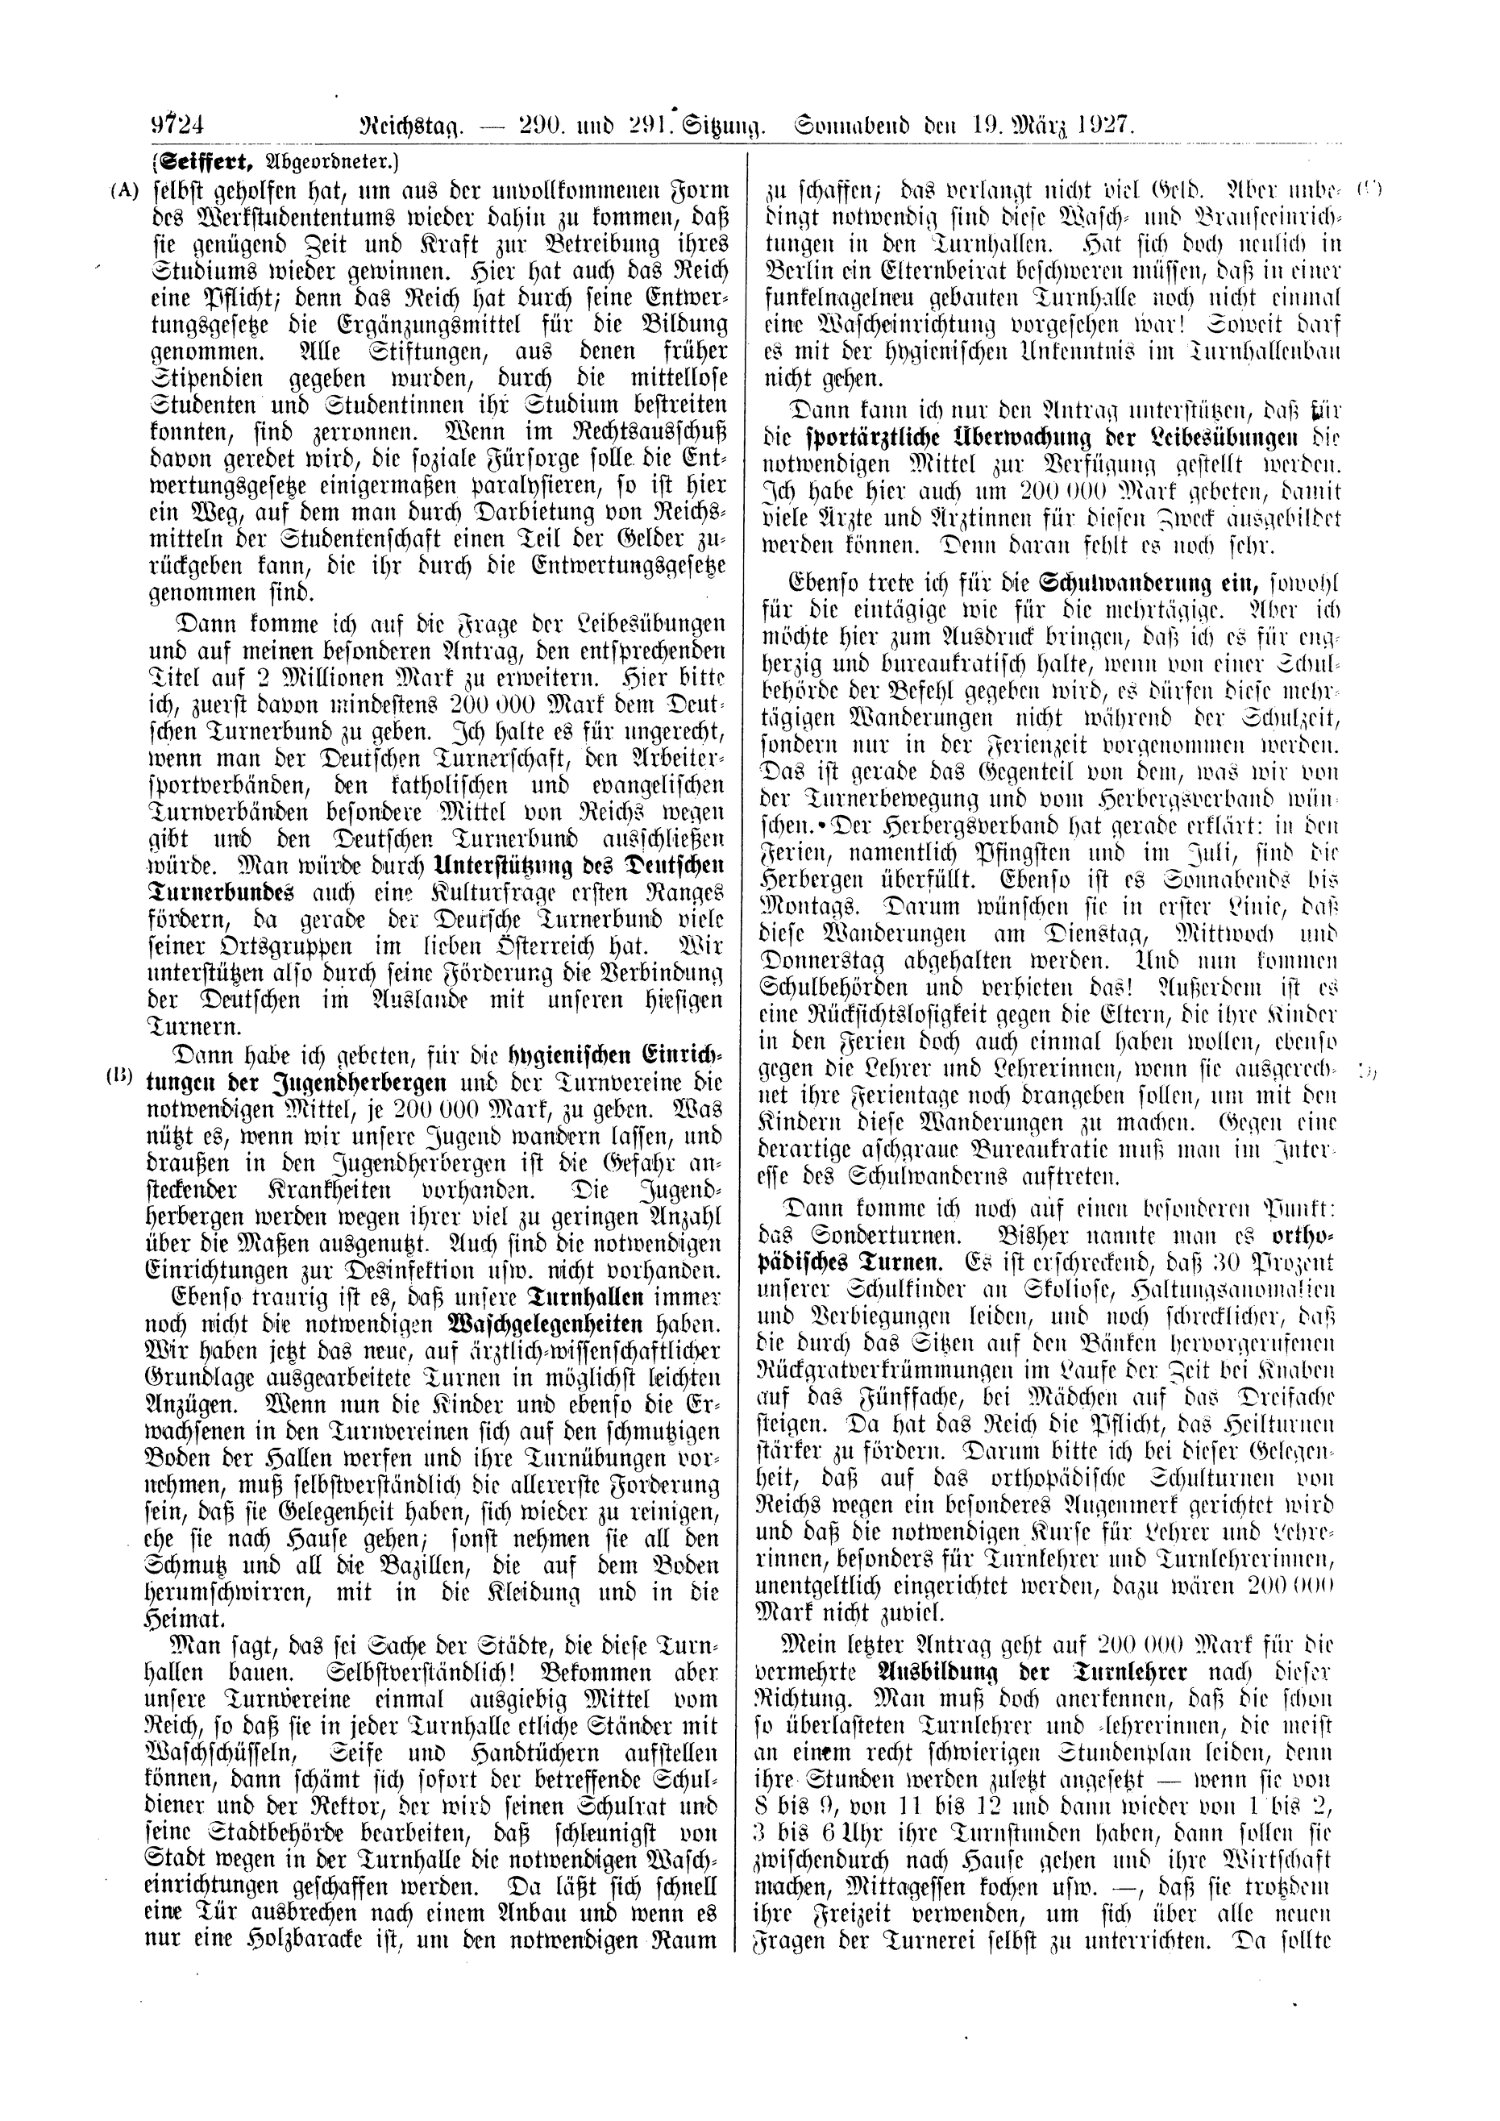 Scan of page 9724